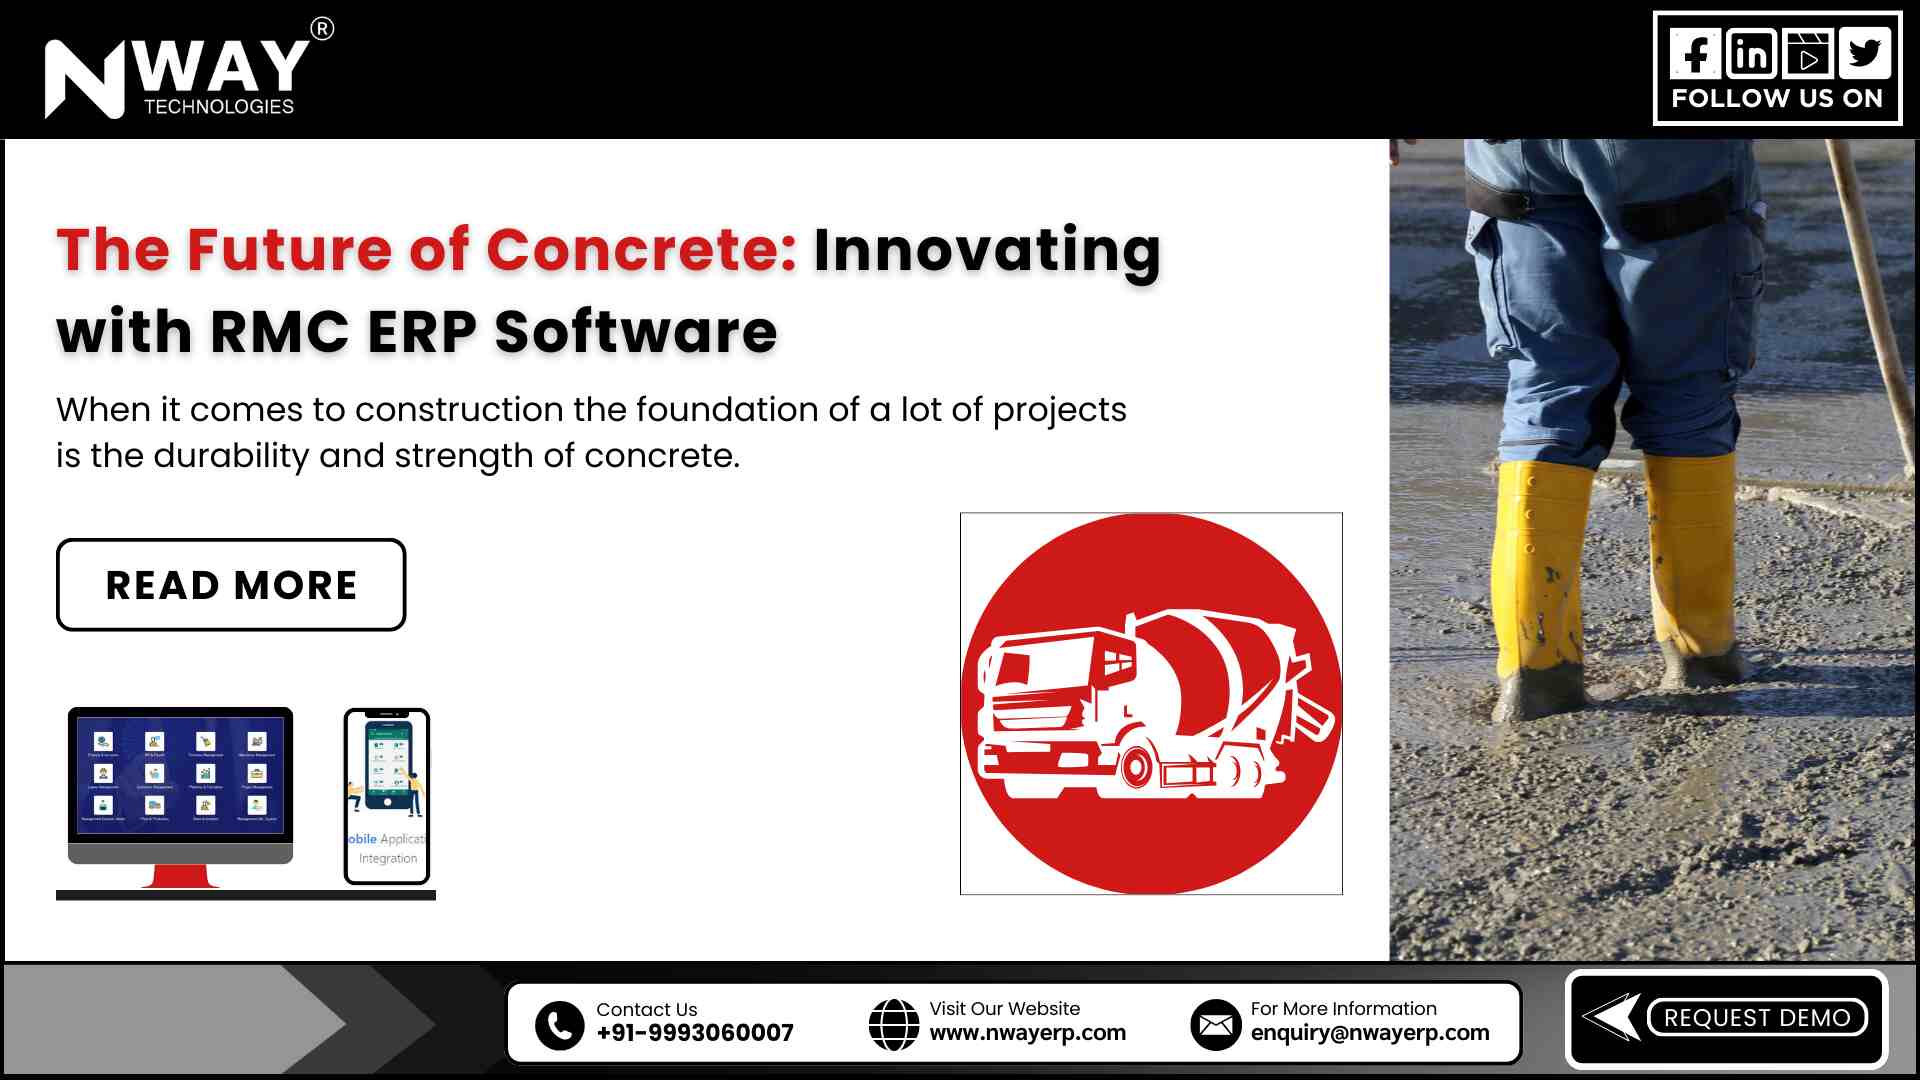 The Future of Concrete: Innovating with RMC ERP Software